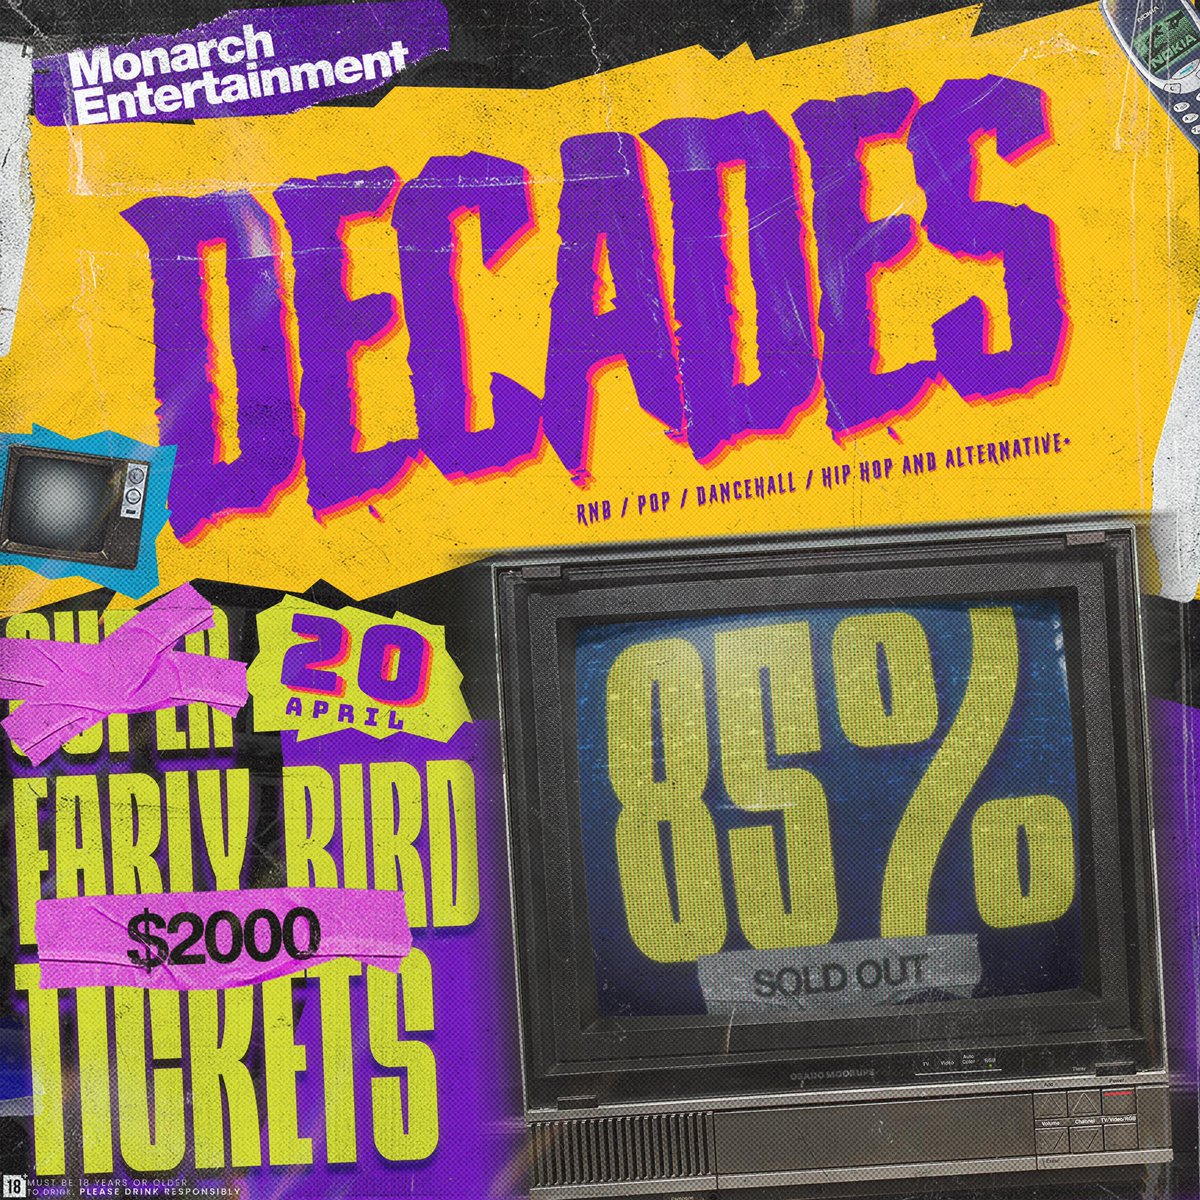 Early Bird tickets are almost gone – 85% sold out already‼️

Secure yours before it’s too late. 🎟️✨ 

#Decadesja #MonarchENTJa #LimitedAvailability #GrabYoursNow